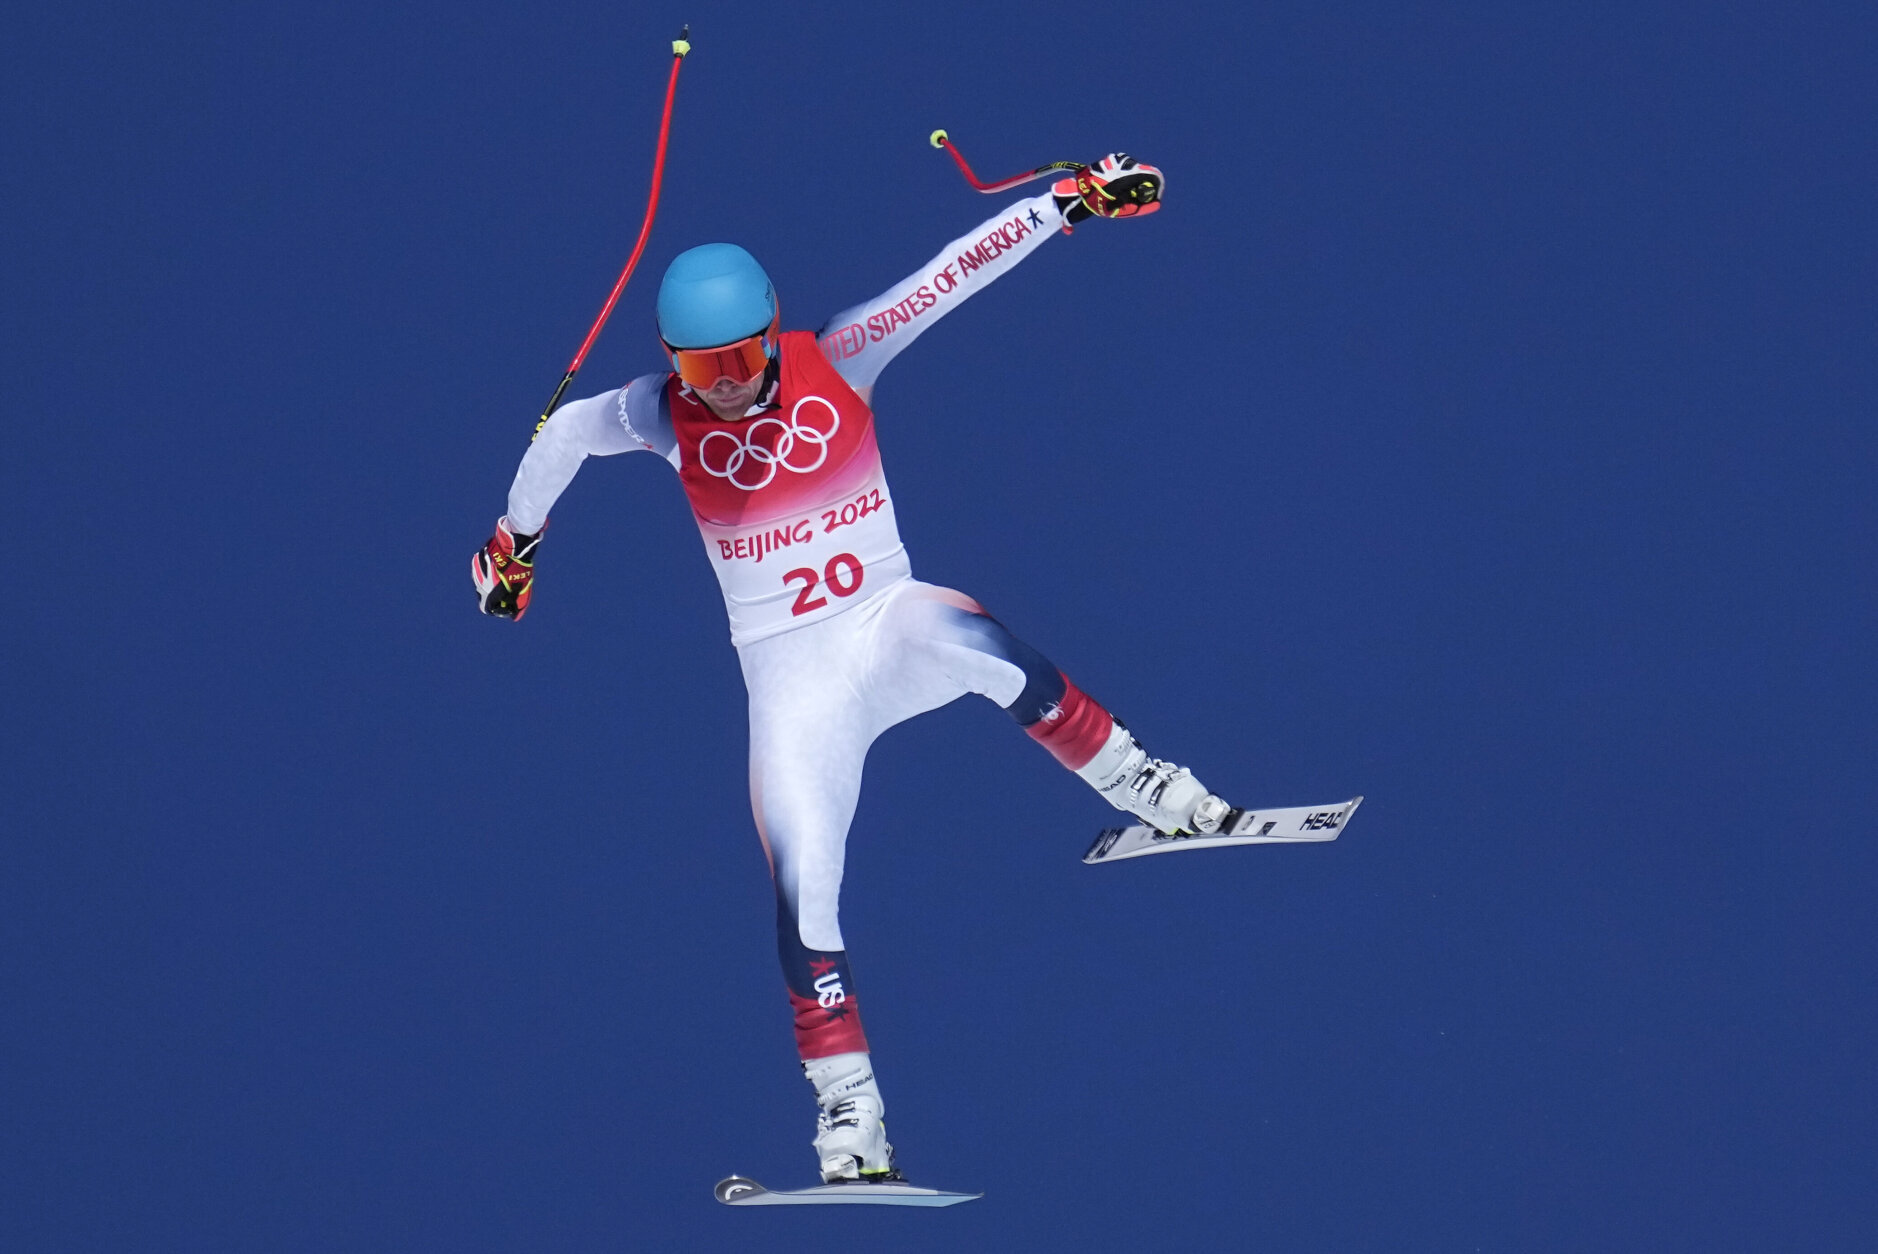 FILE - Ryan Cochran-Siegle, of the United States makes a jump during a men's downhill training run at the 2022 Winter Olympics, Thursday, Feb. 3, 2022, in the Yanqing district of Beijing. Fifty years after his mom, Barbara Ann, won the gold in slalom, Cochran-Siegle is contending for a medal in the men's downhill that will open the Alpine skiing program of the Beijing Games on Sunday. (AP Photo/Robert F. Bukaty, File)